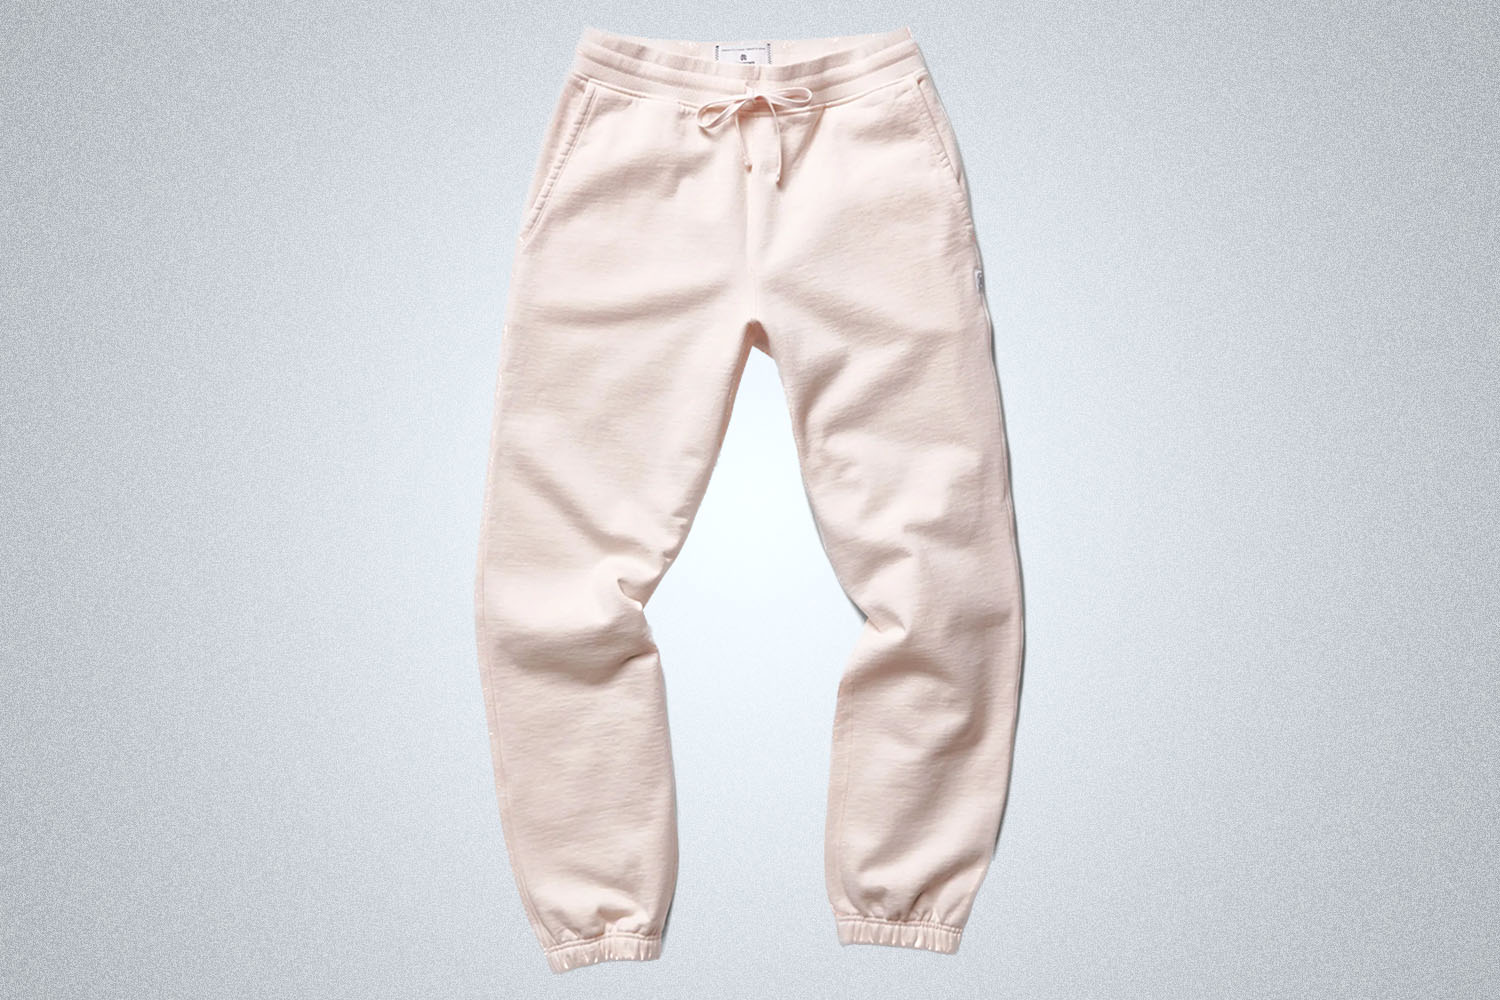 a pair of pink Reigning Champ sweatpants on a grey background